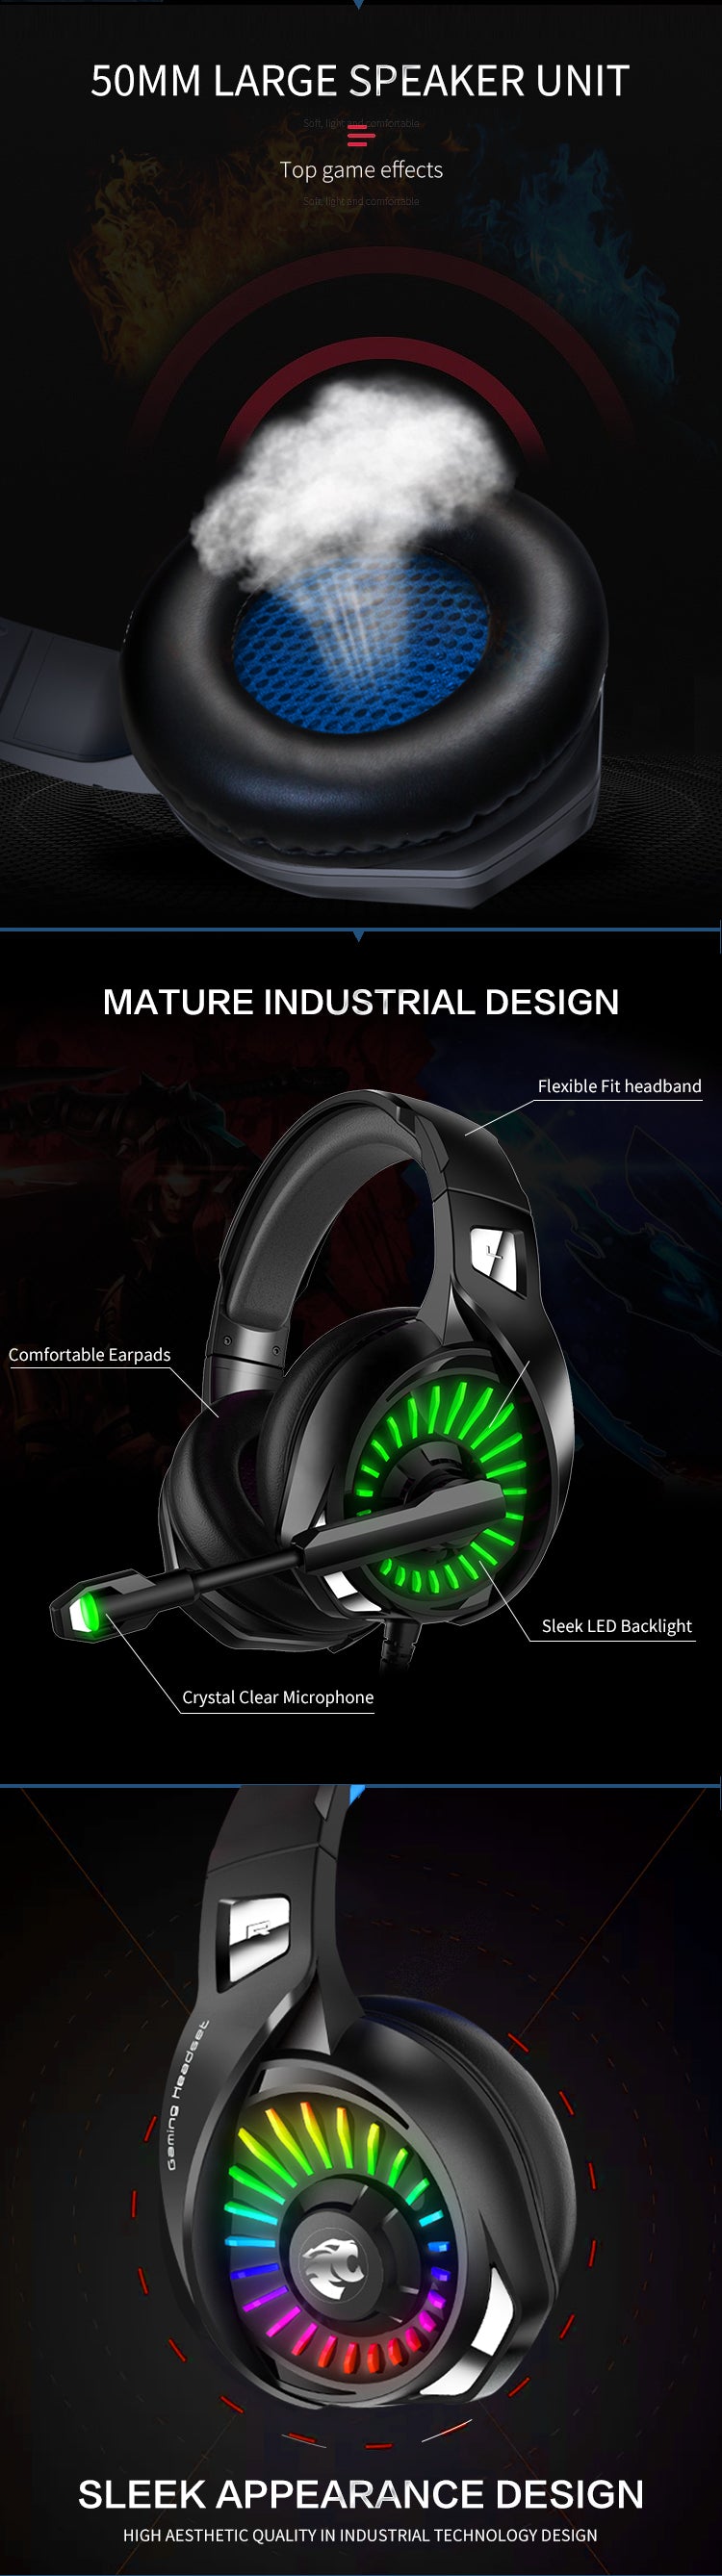 Pro Gaming Headset with RGB light